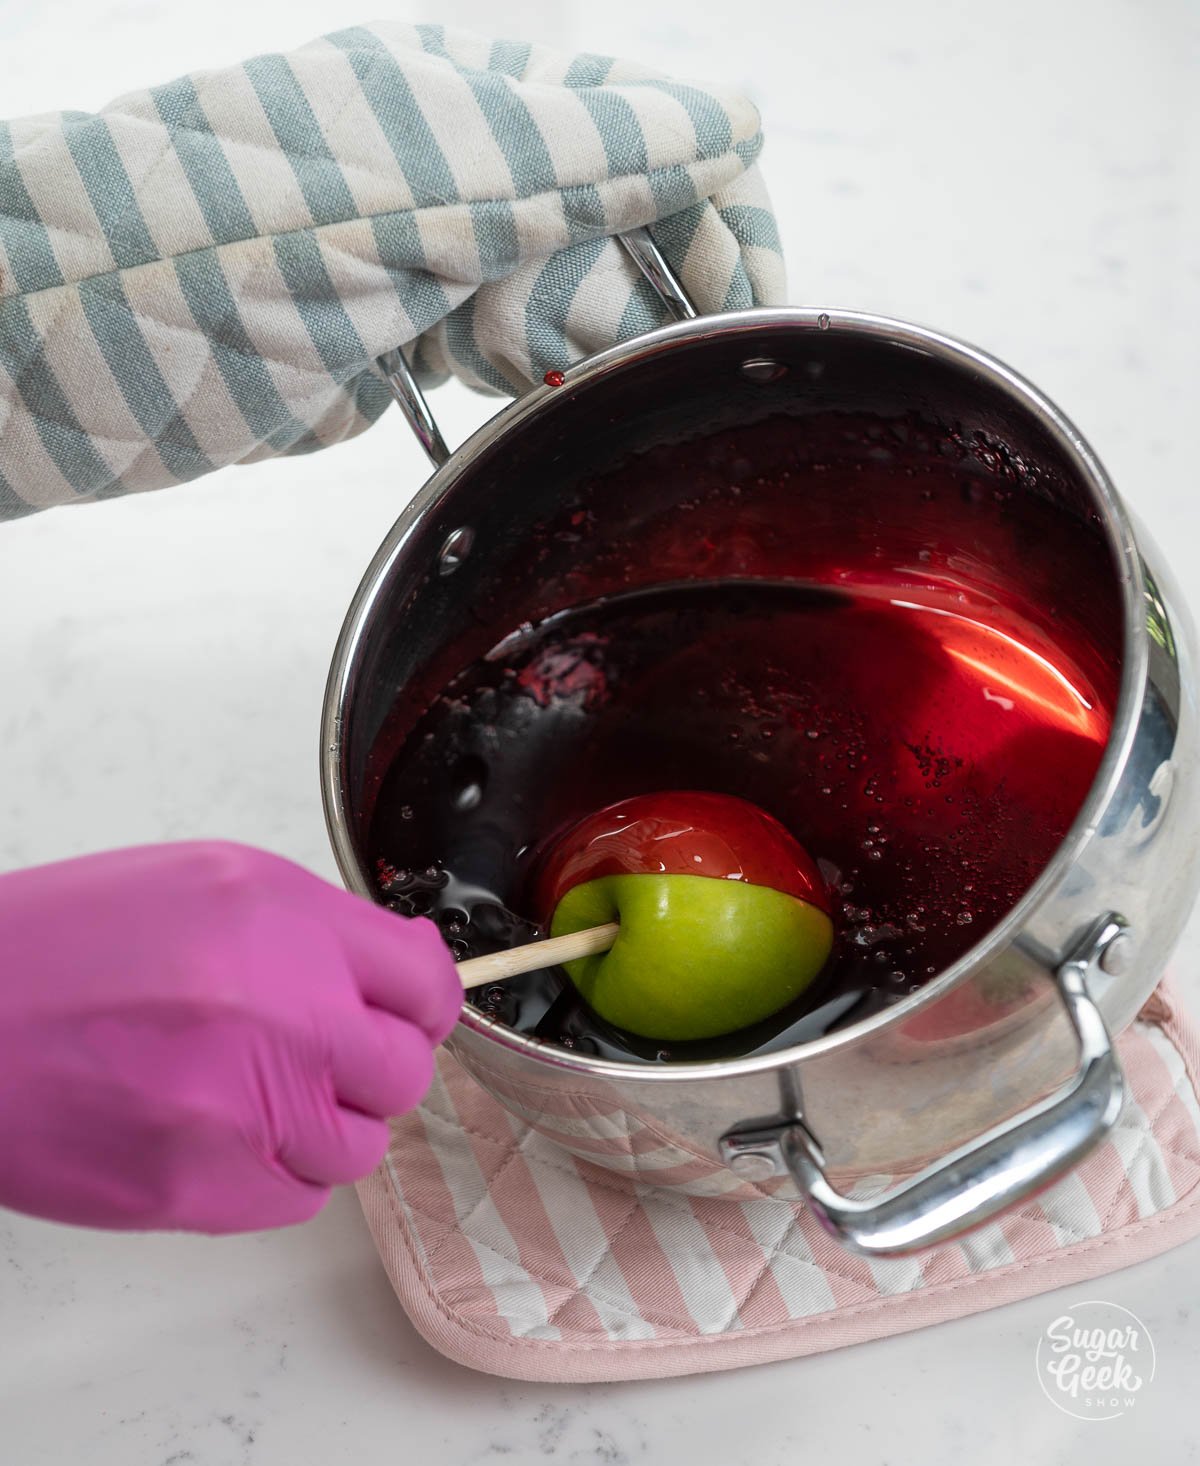 dipping a green apple in candy apple mixture